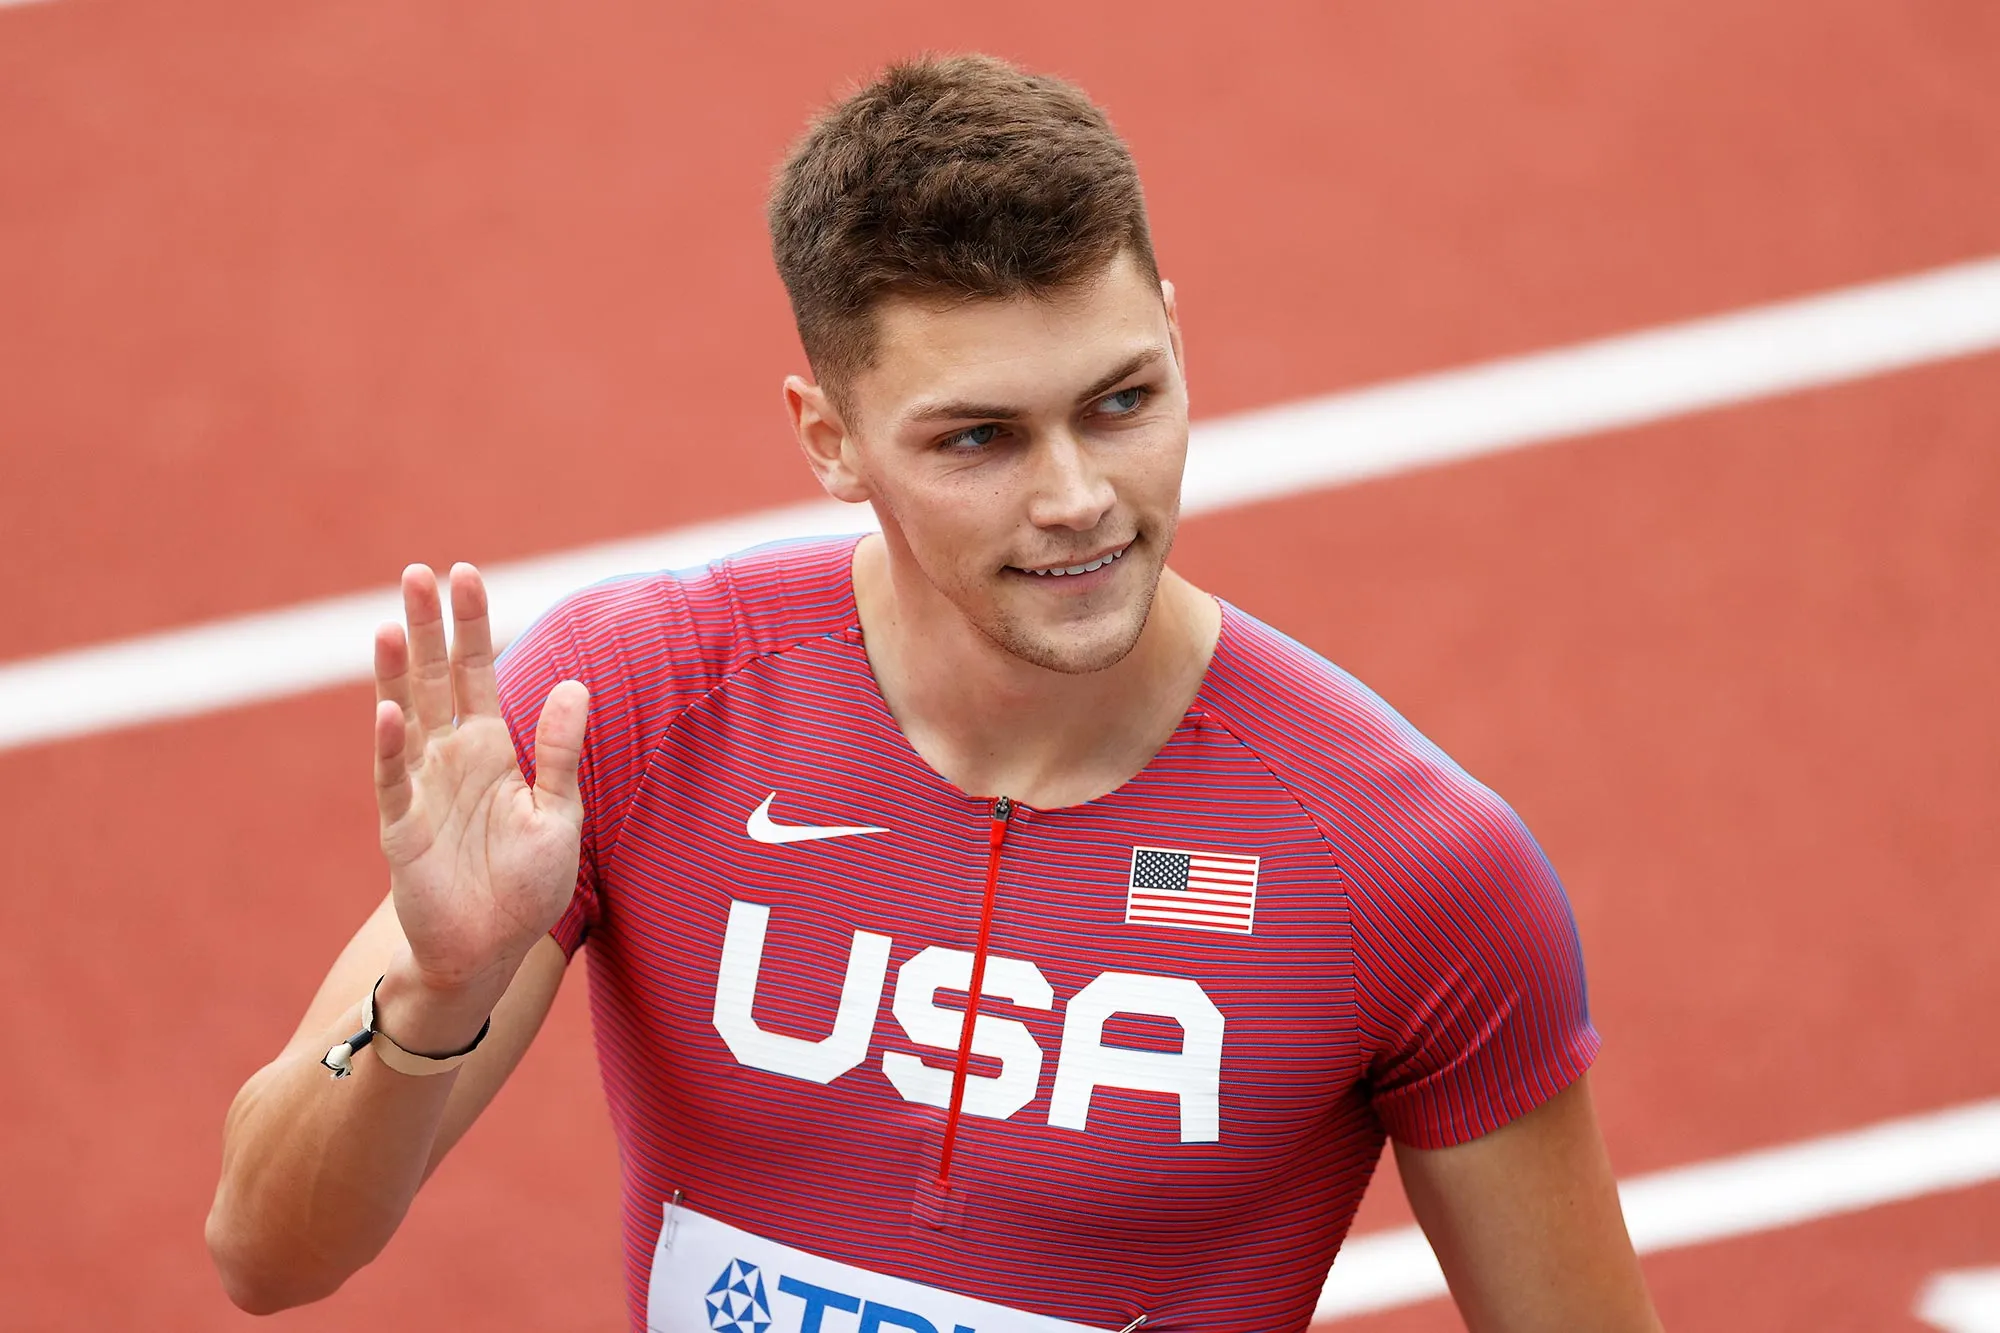 “I like to kiss guys”: American athletics star Trey Cunningham comes out as gay